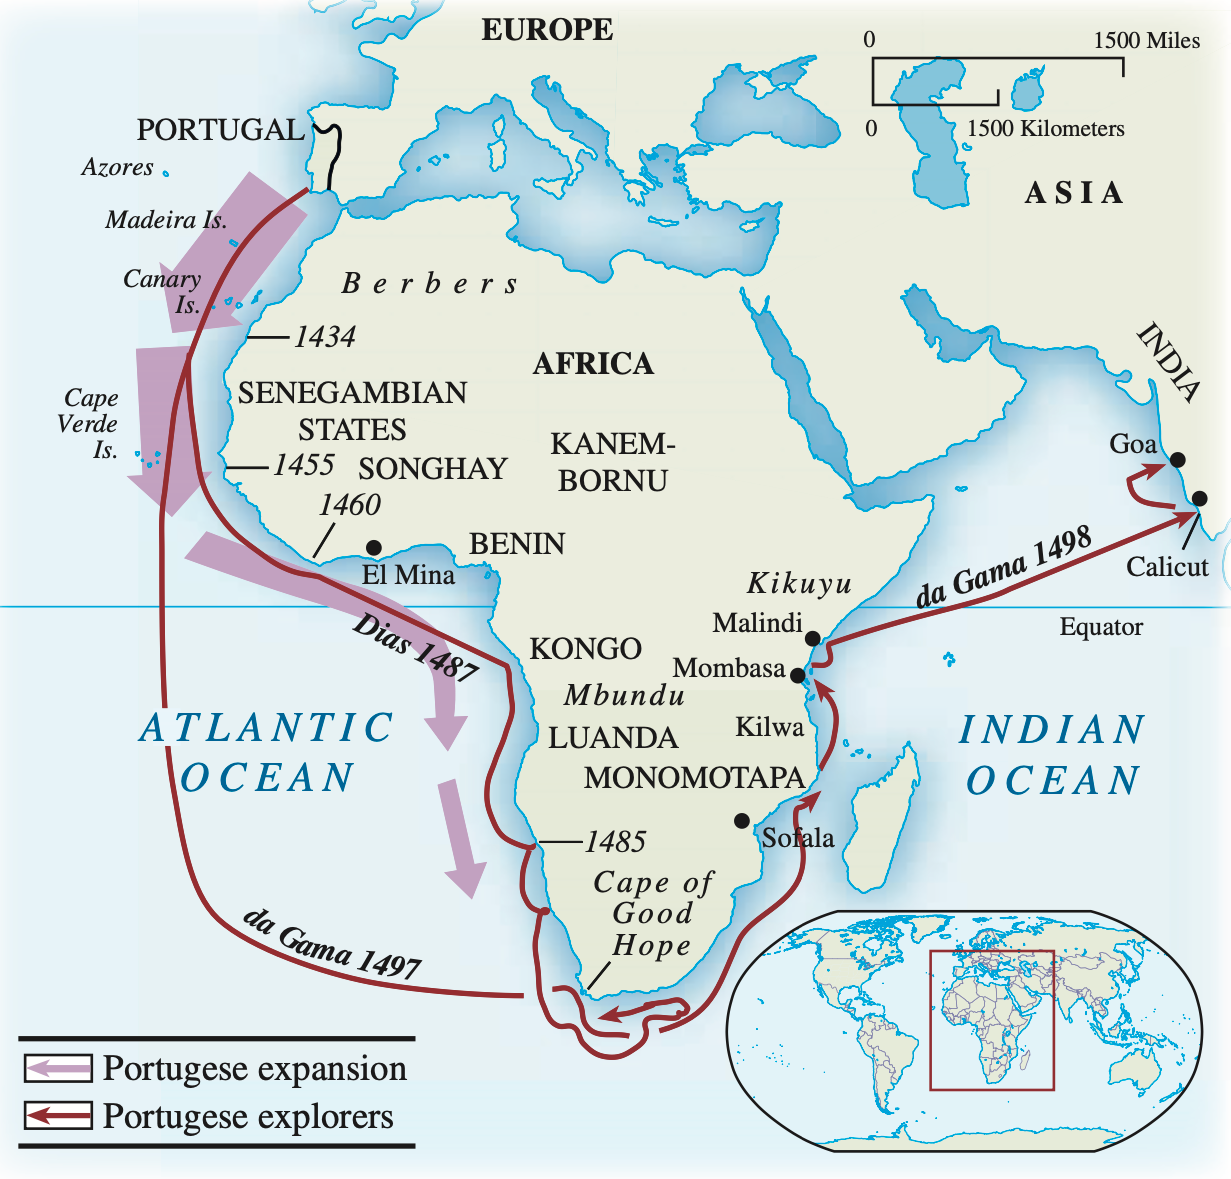 Map of Portuguese maritime expansion around Africa and into the Indian Ocean. Note the use of both “explorers” and “expansion.” Source: Stearns, World Civilizations.